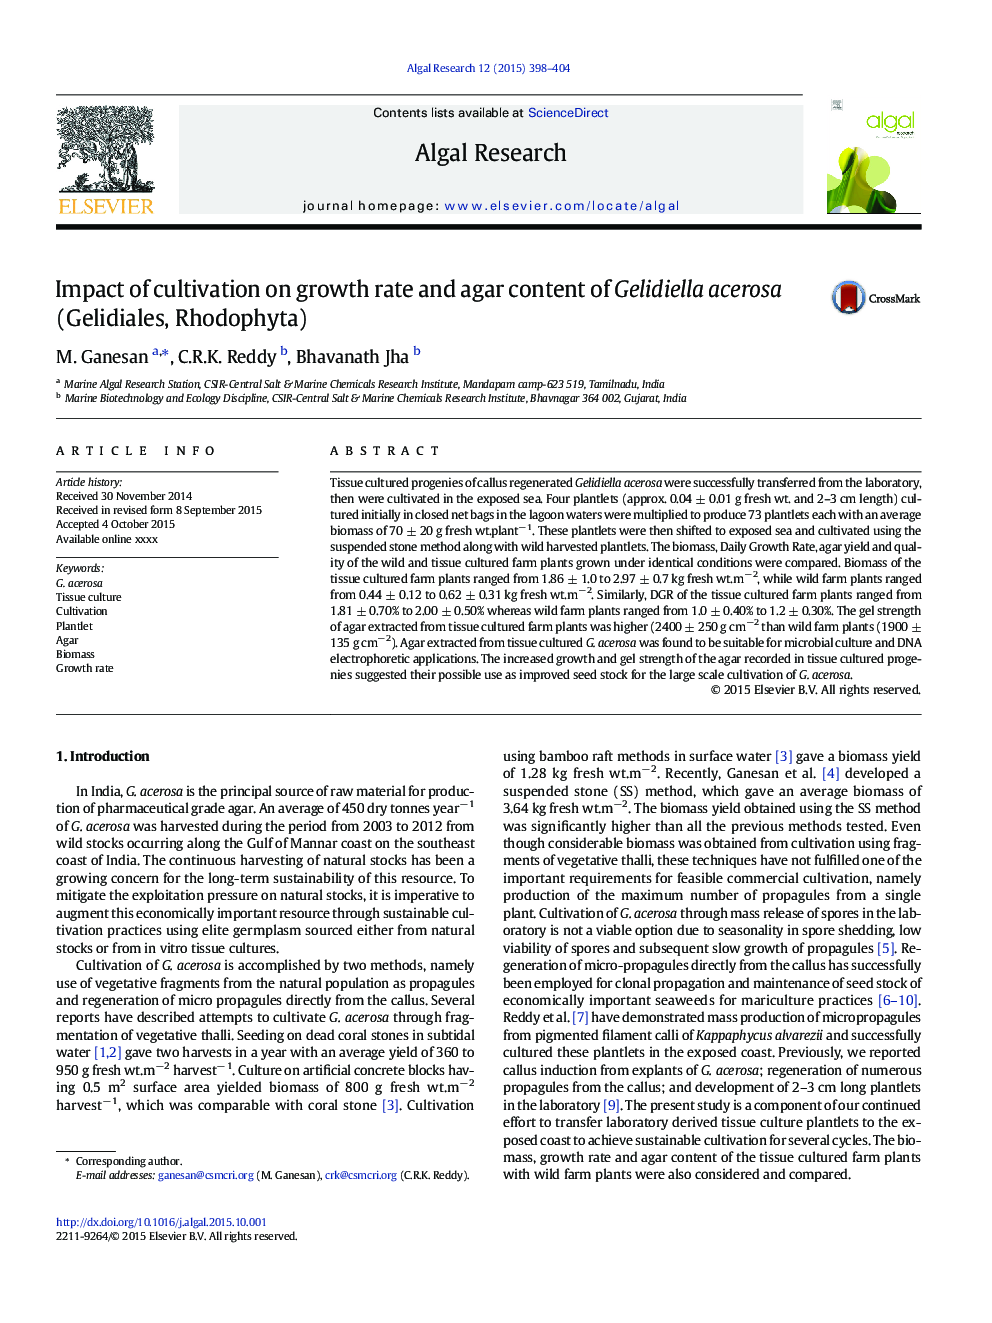 Impact of cultivation on growth rate and agar content of Gelidiella acerosa (Gelidiales, Rhodophyta)